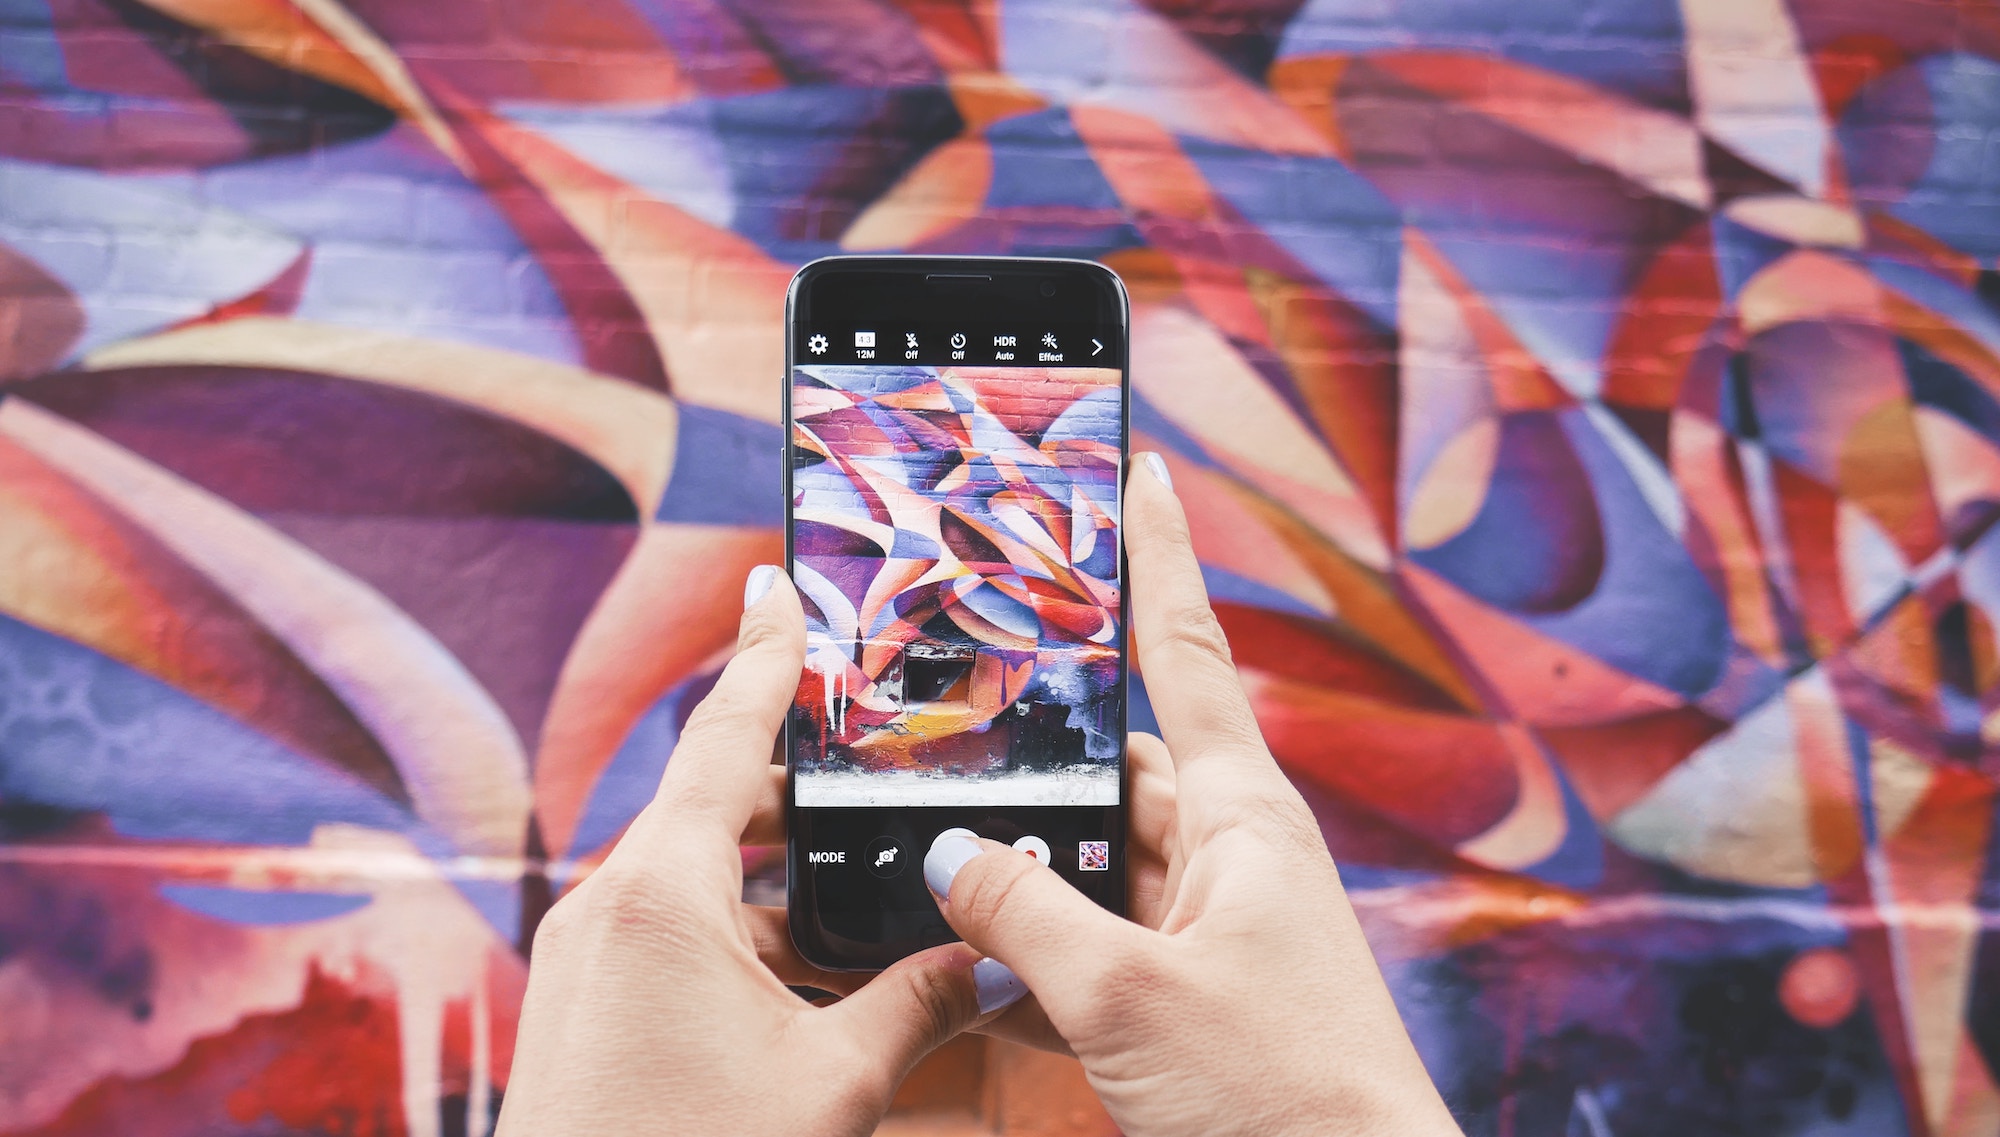 Hands holding a phone up in front of street art - abstract shapes in red, orange and purple